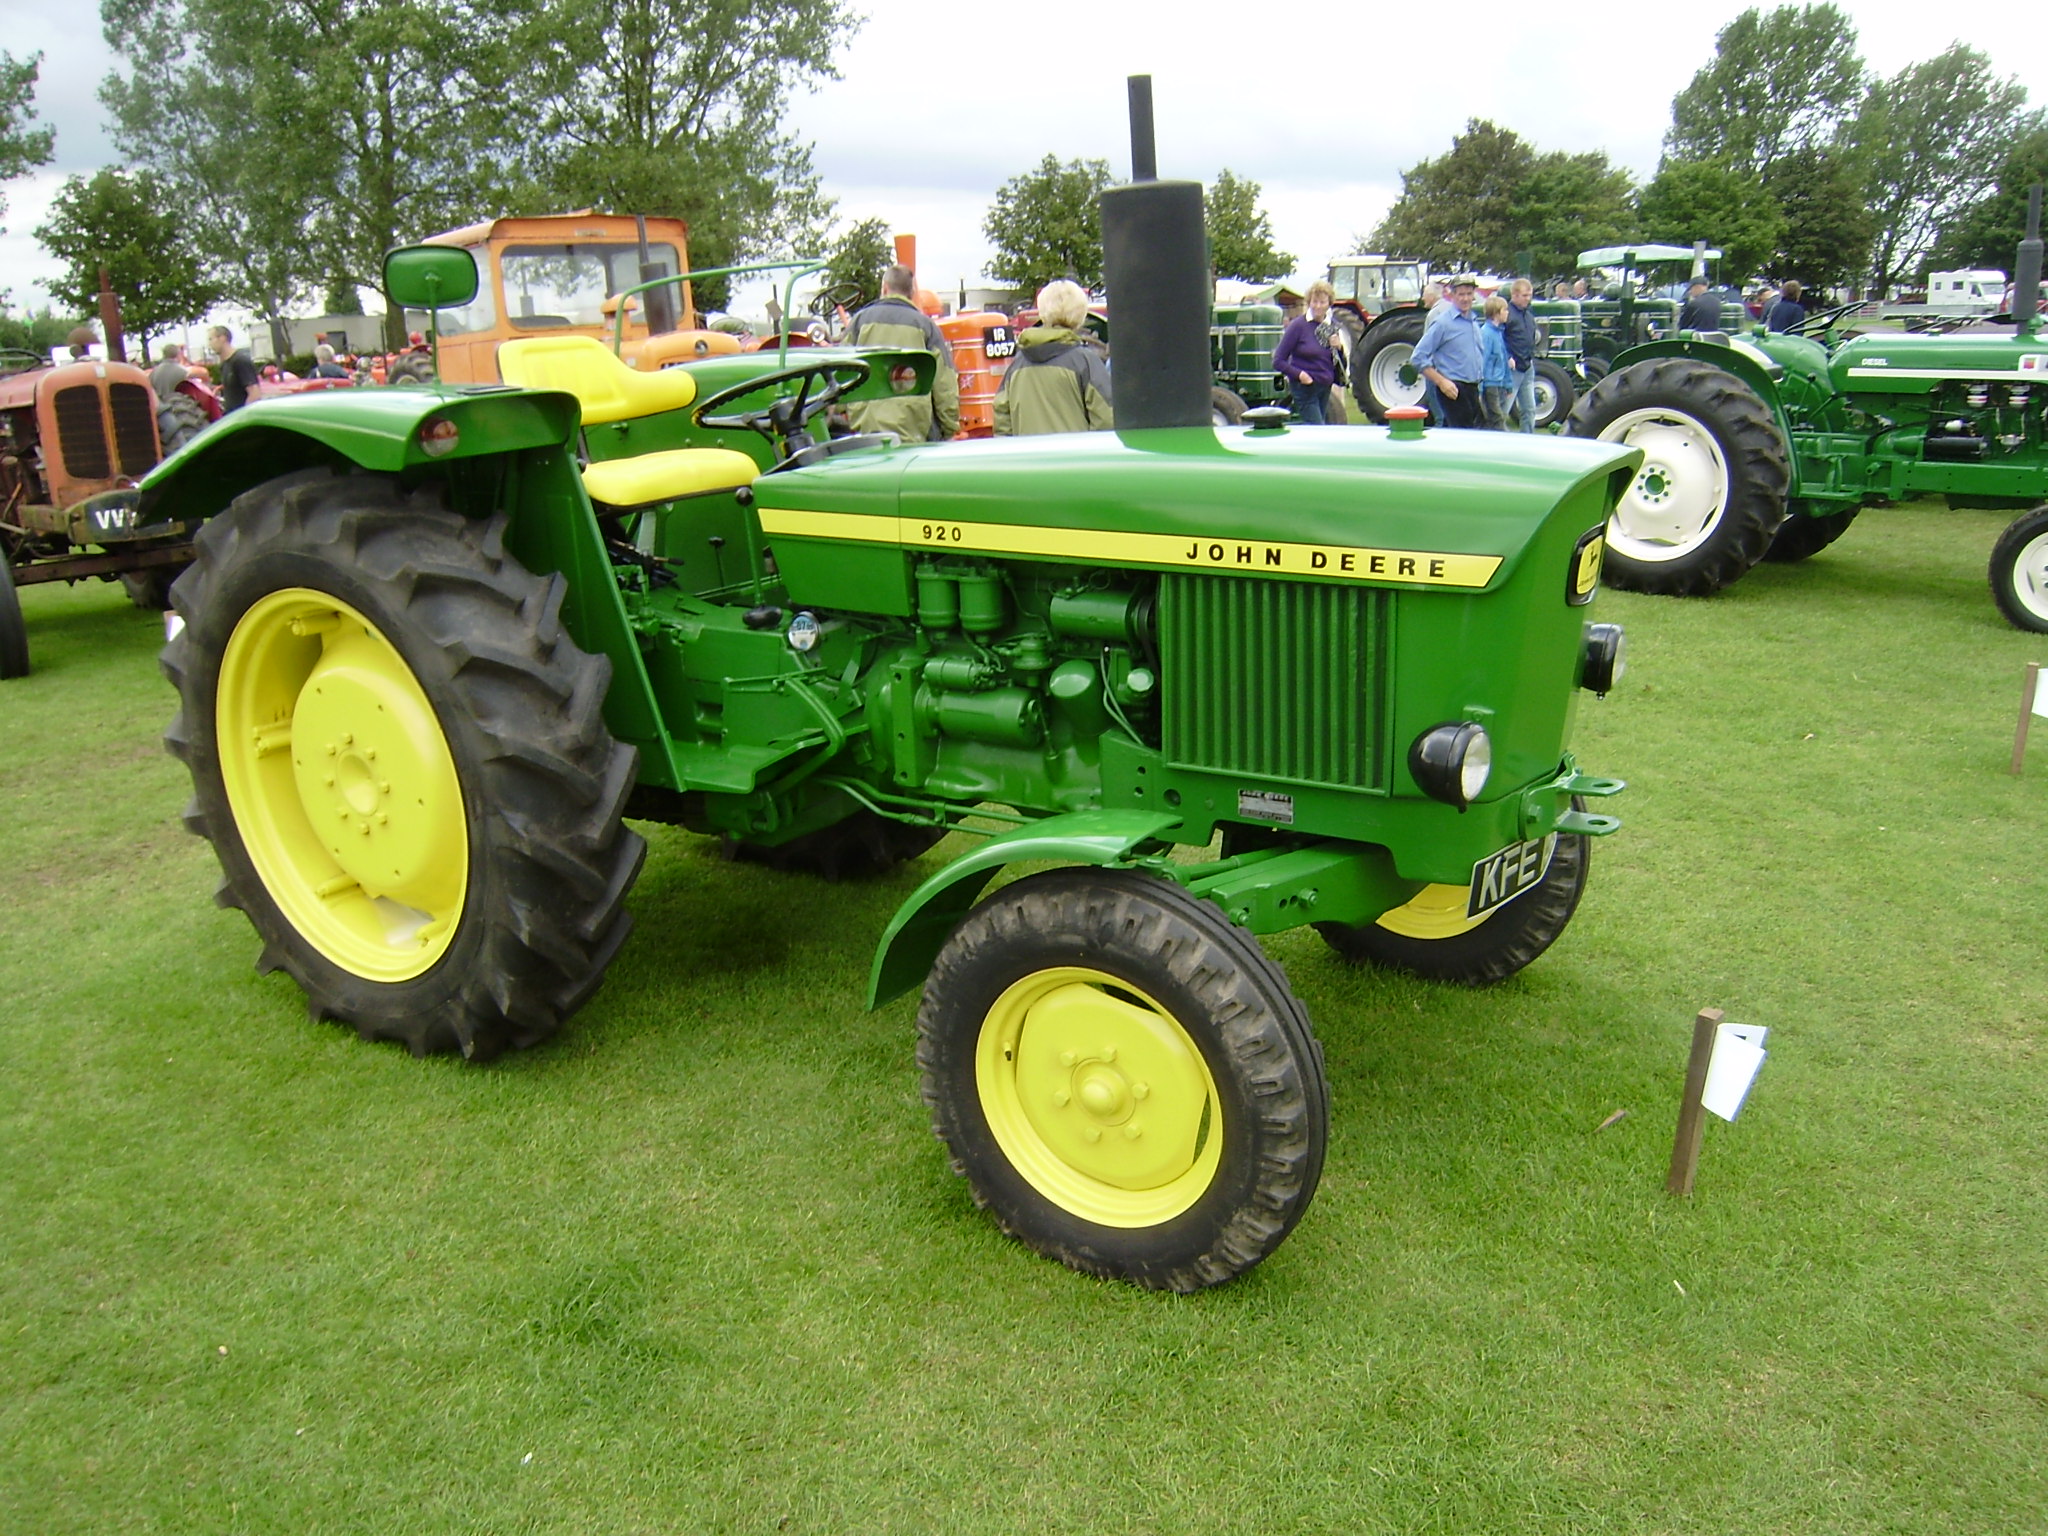 john deere 920 - tractor & construction plant wiki - the